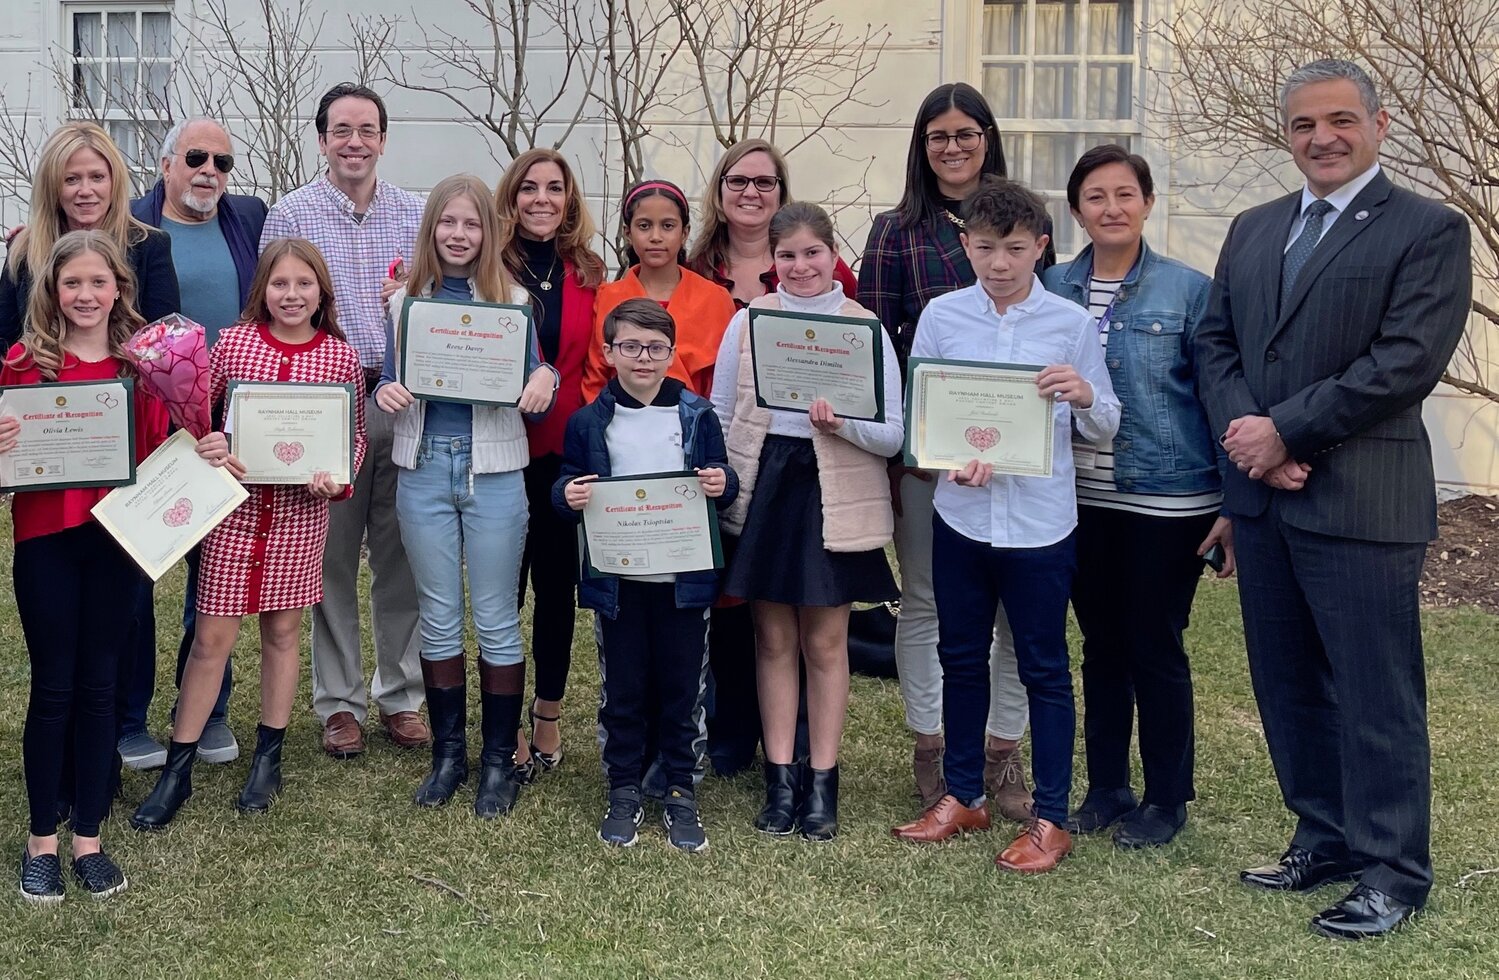 The winners of last year’s Raynham Hall Valentine’s Day Poetry Contest gathered outside the museum with elected officials, museum staff and educators and administrators from the Oyster Bay-East Norwich School District.